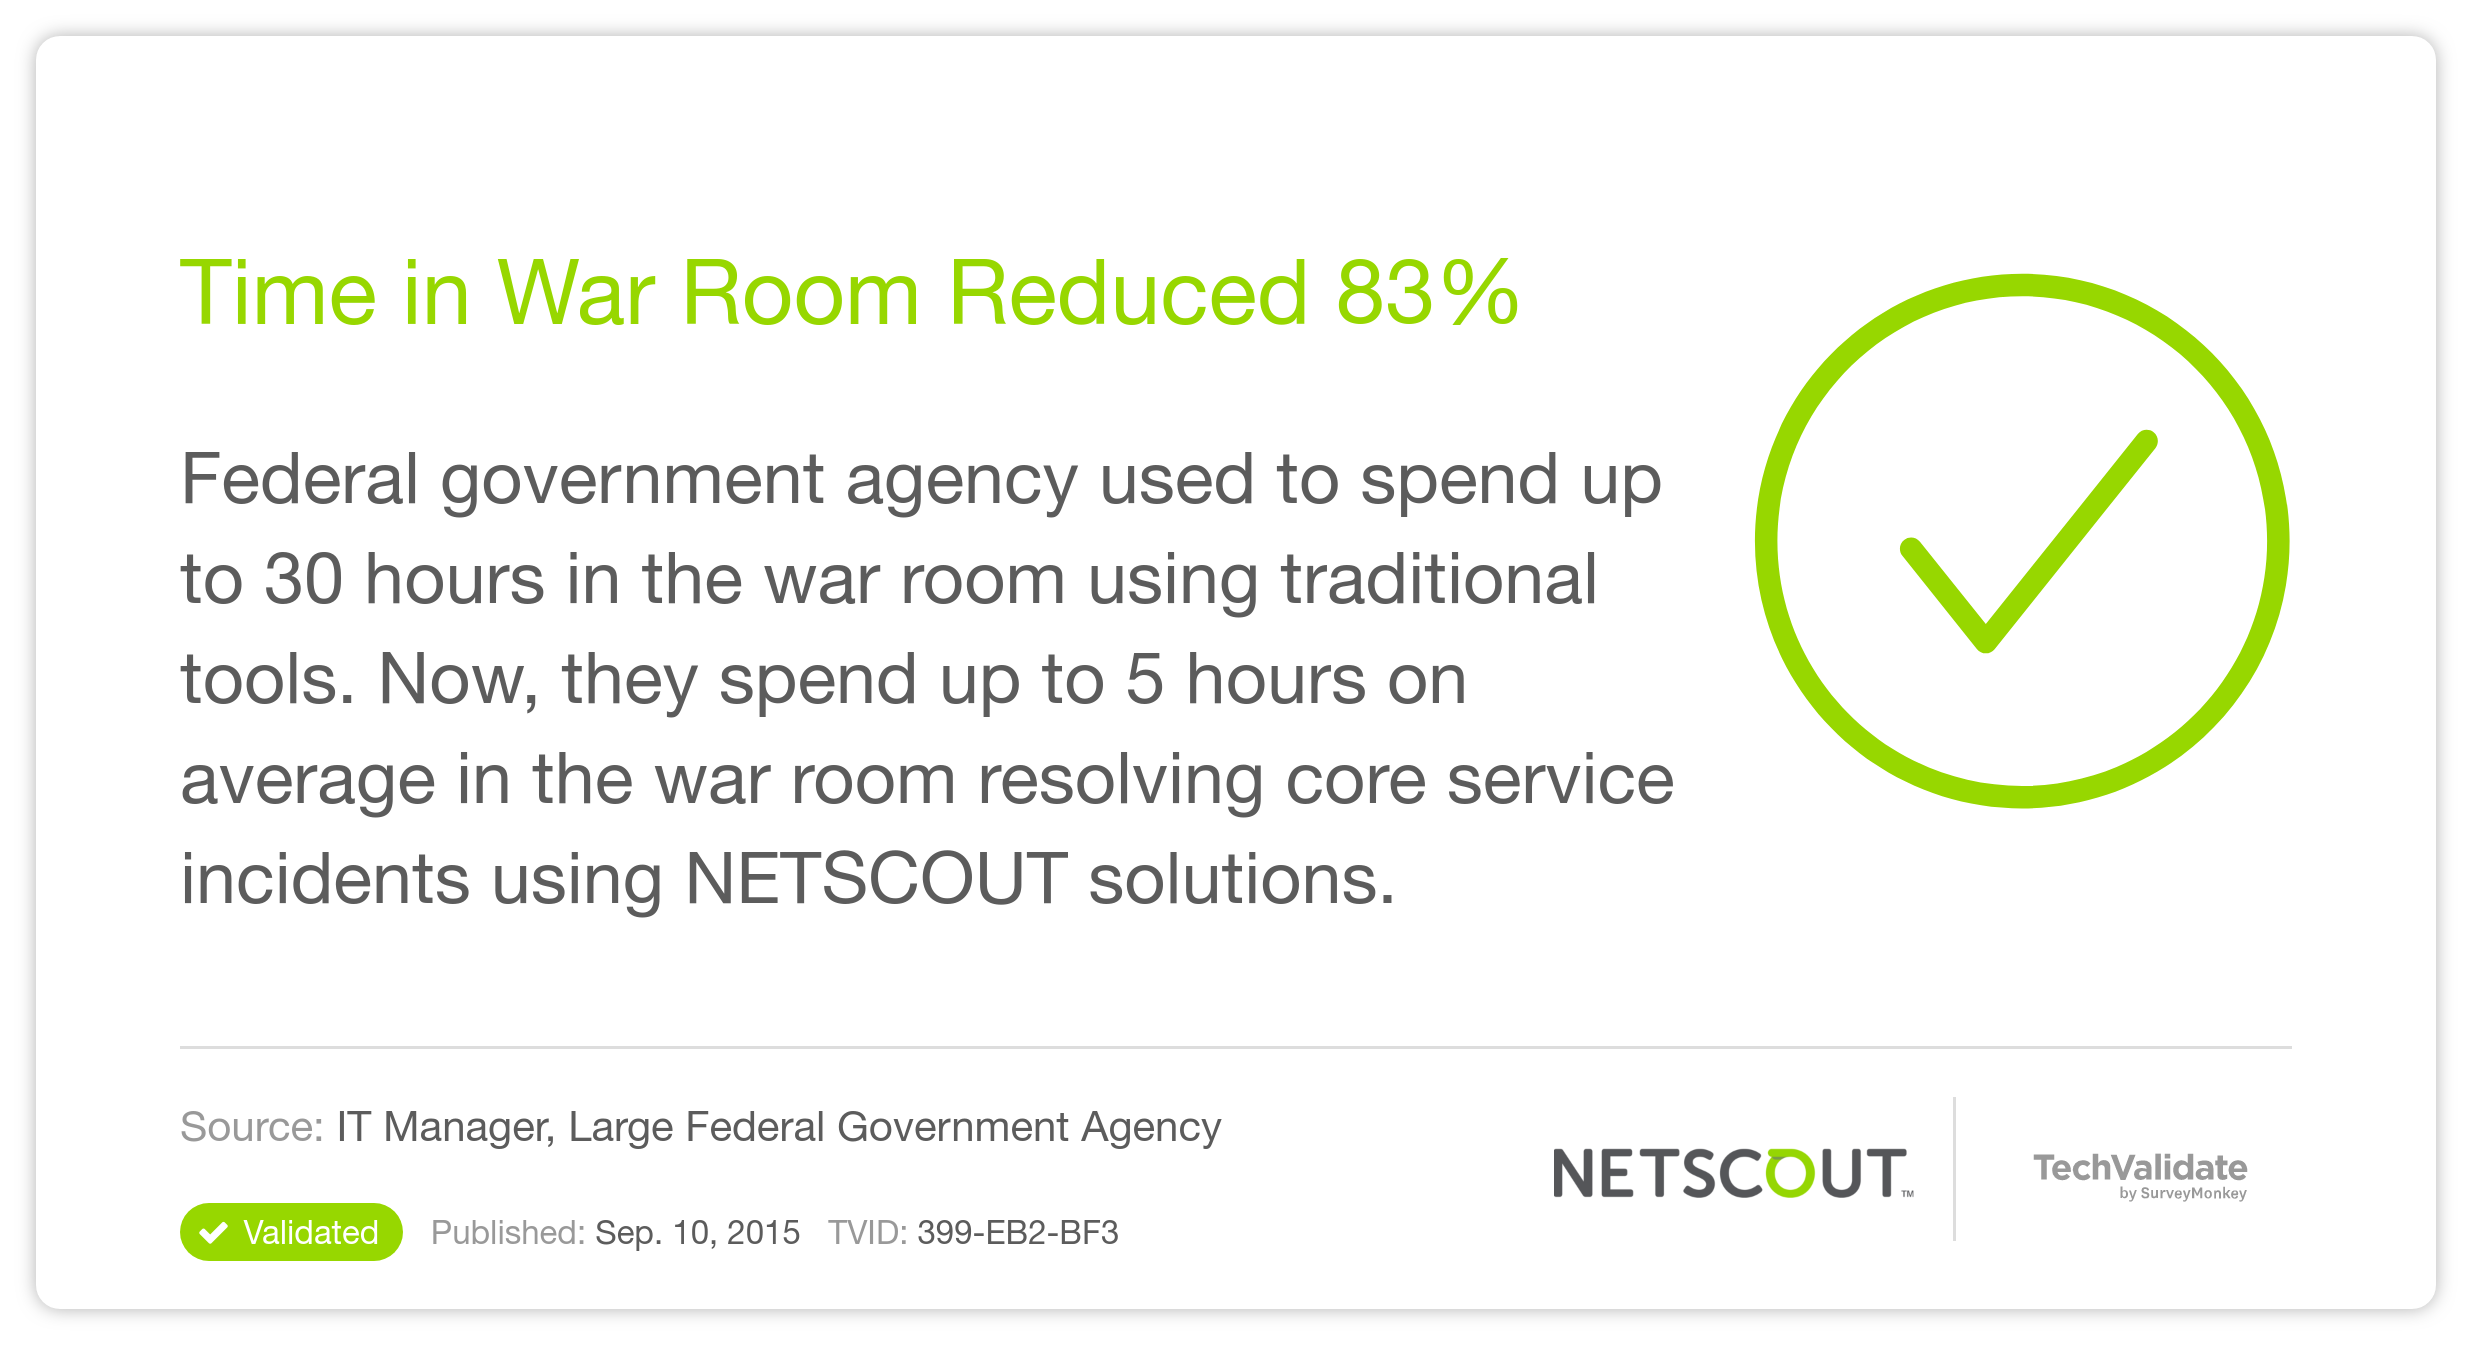 Time in War Room Reduced 83%